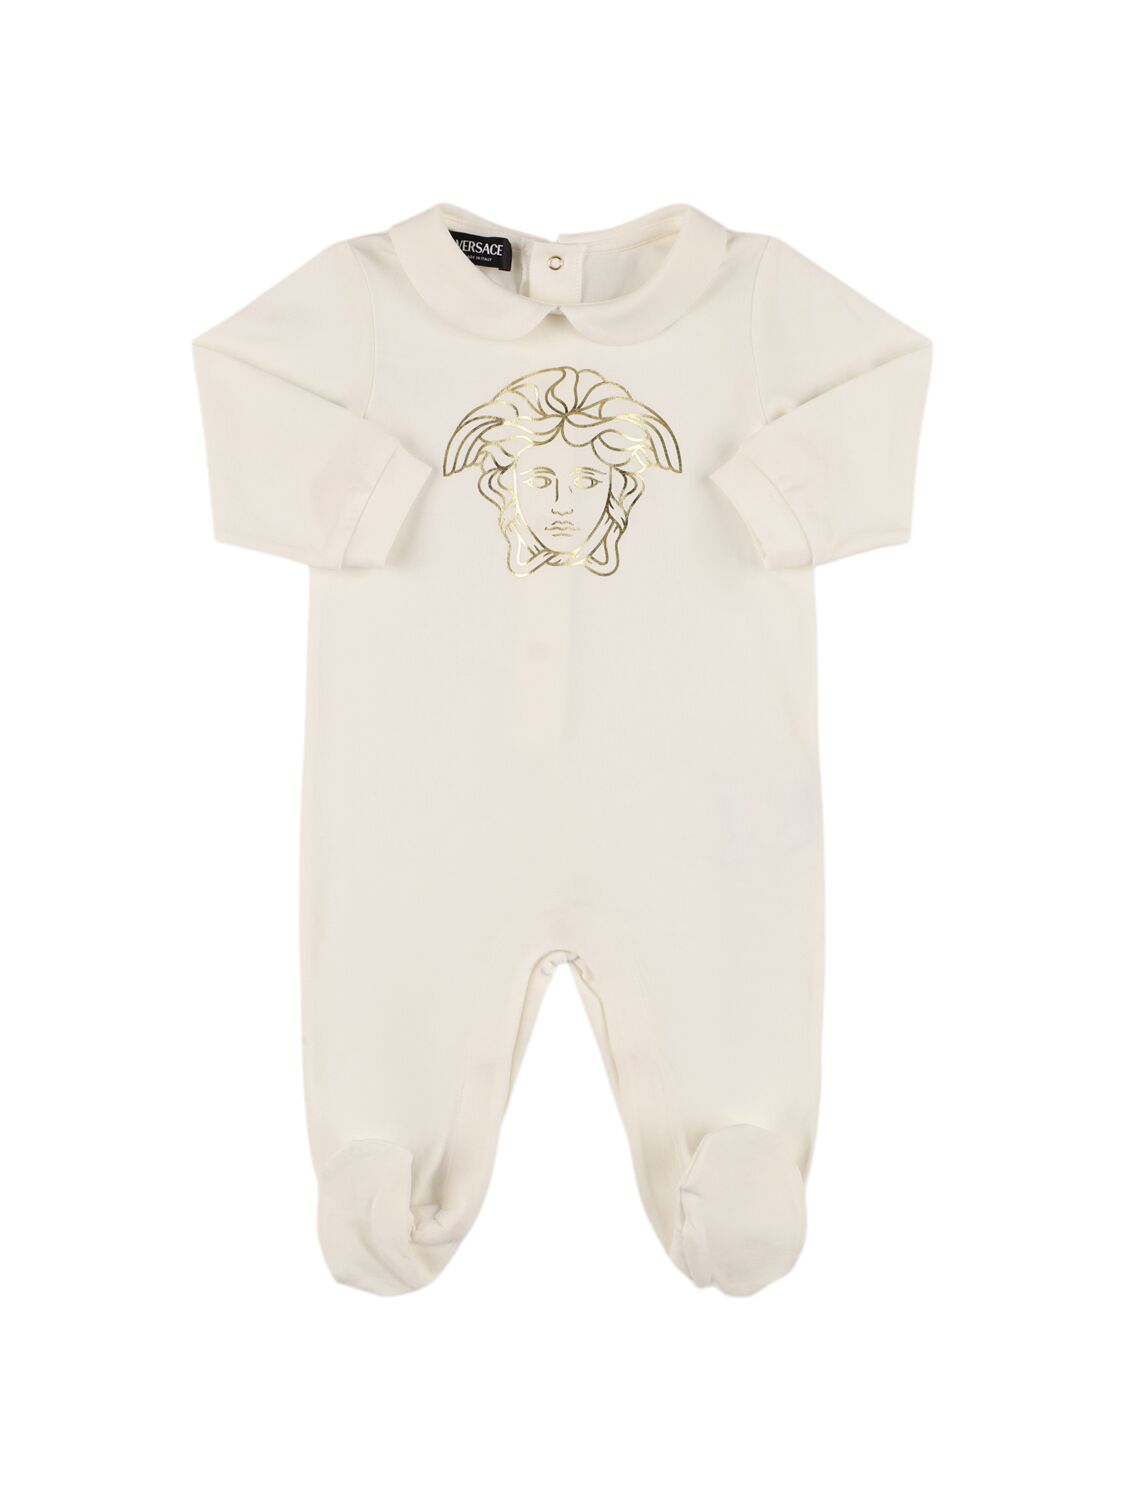 Versace Printed Cotton Jersey Romper In White/gold